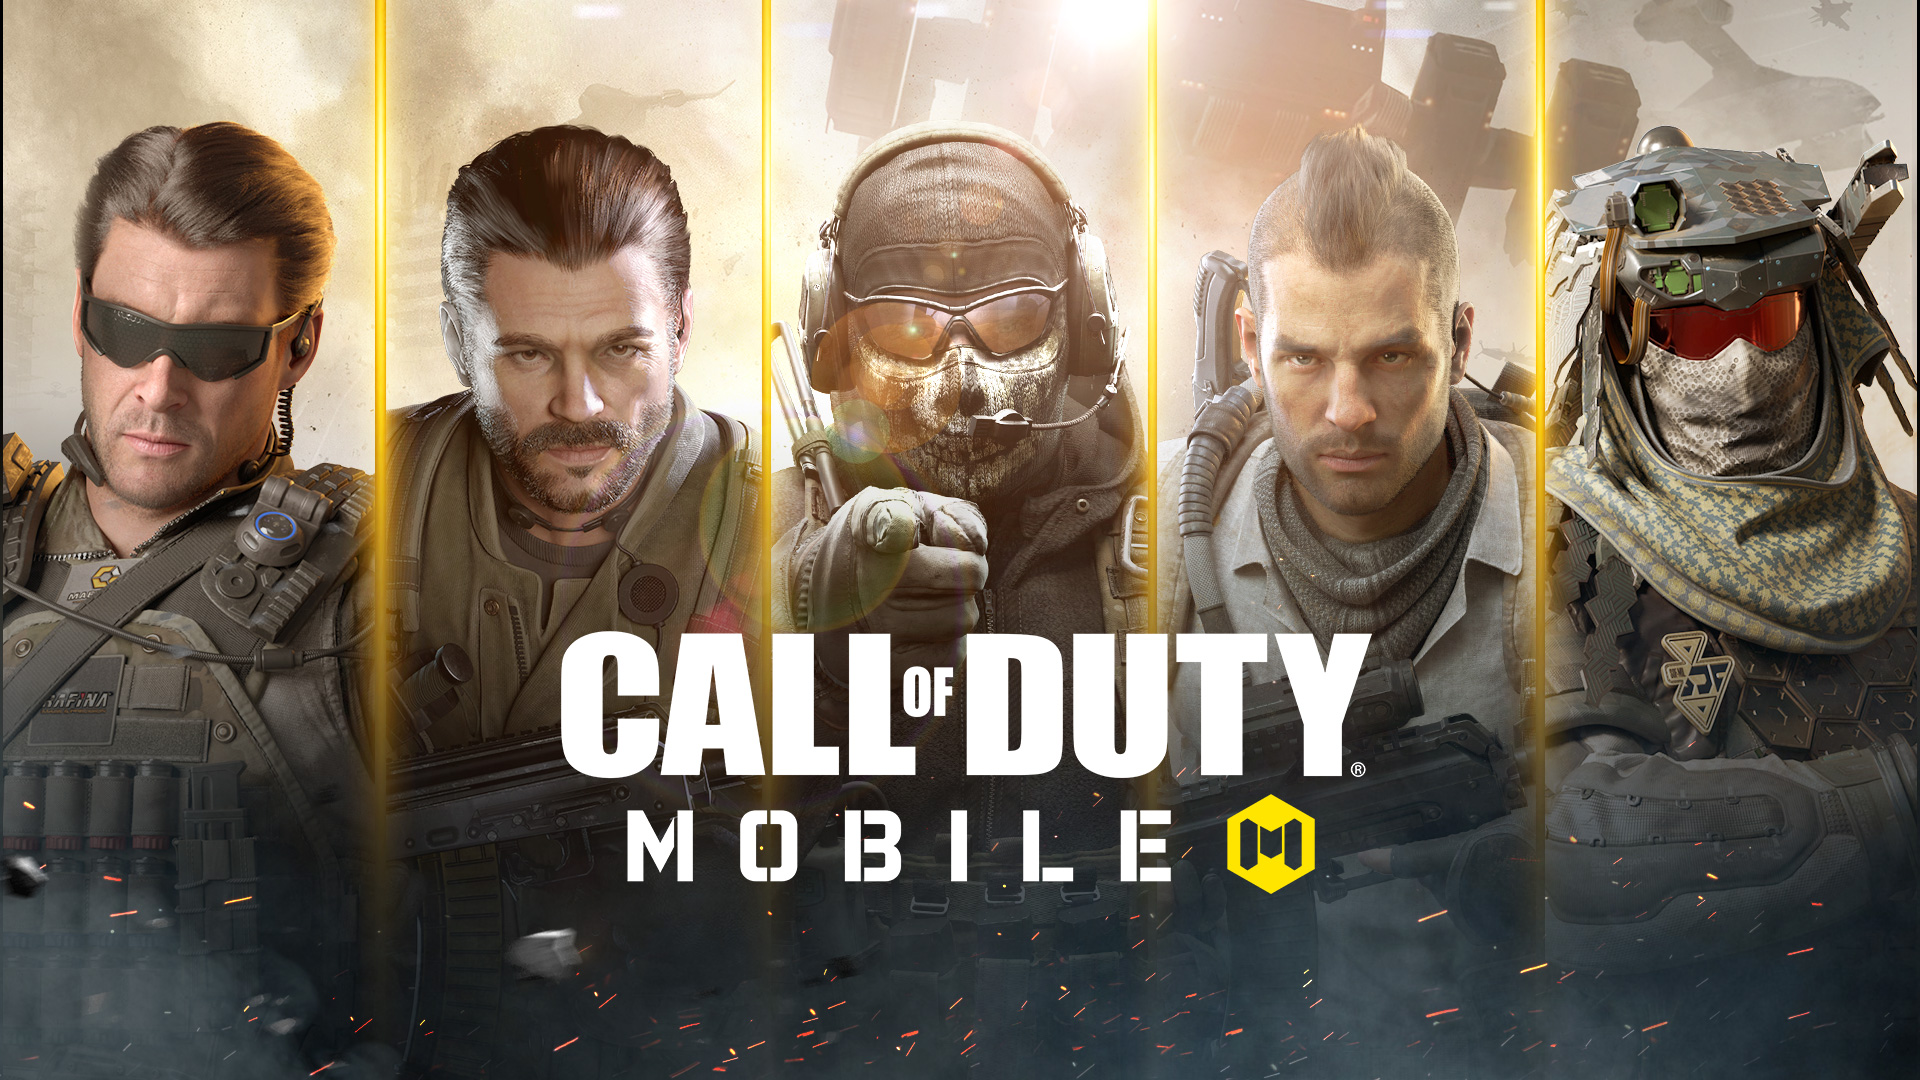 Call of duty mobile official website what does apple warranty cover for macbook pro